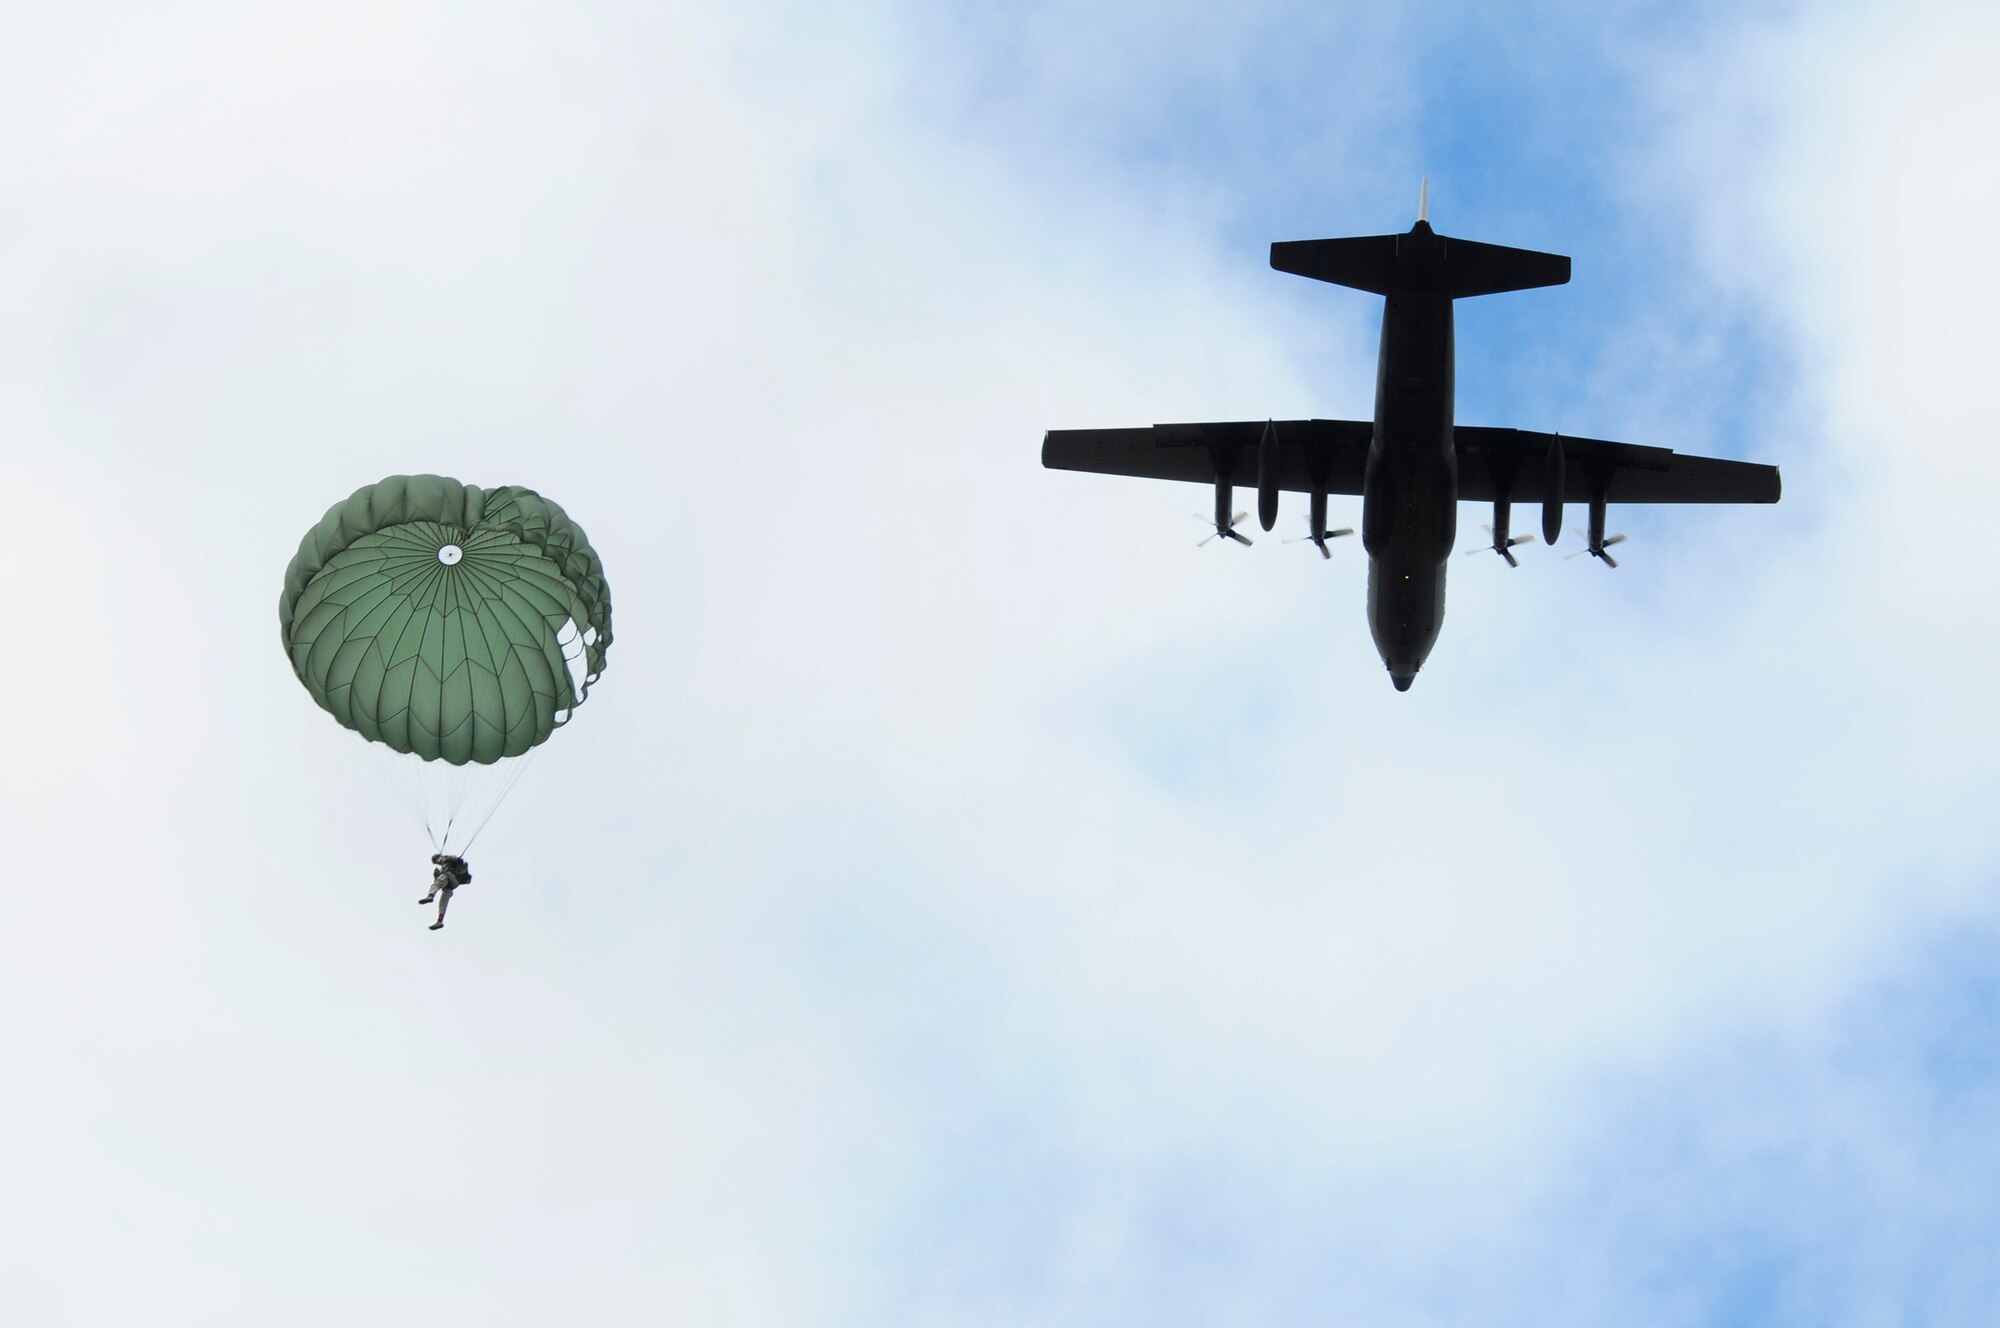 A member of the 435th Security Forces Squadron glides into a designated drop zone while a C-130J Super Hercules passes during an off-site training in Zaragoza, Spain, Dec. 12, 2011. The OST consisted of a 90 member team and two aircraft, all assembled to enhance interoperability between U.S. and Spanish air forces as well as build partnerships between the two countries. (U.S. Air Force photo by Senior Airman Katherine Holt)